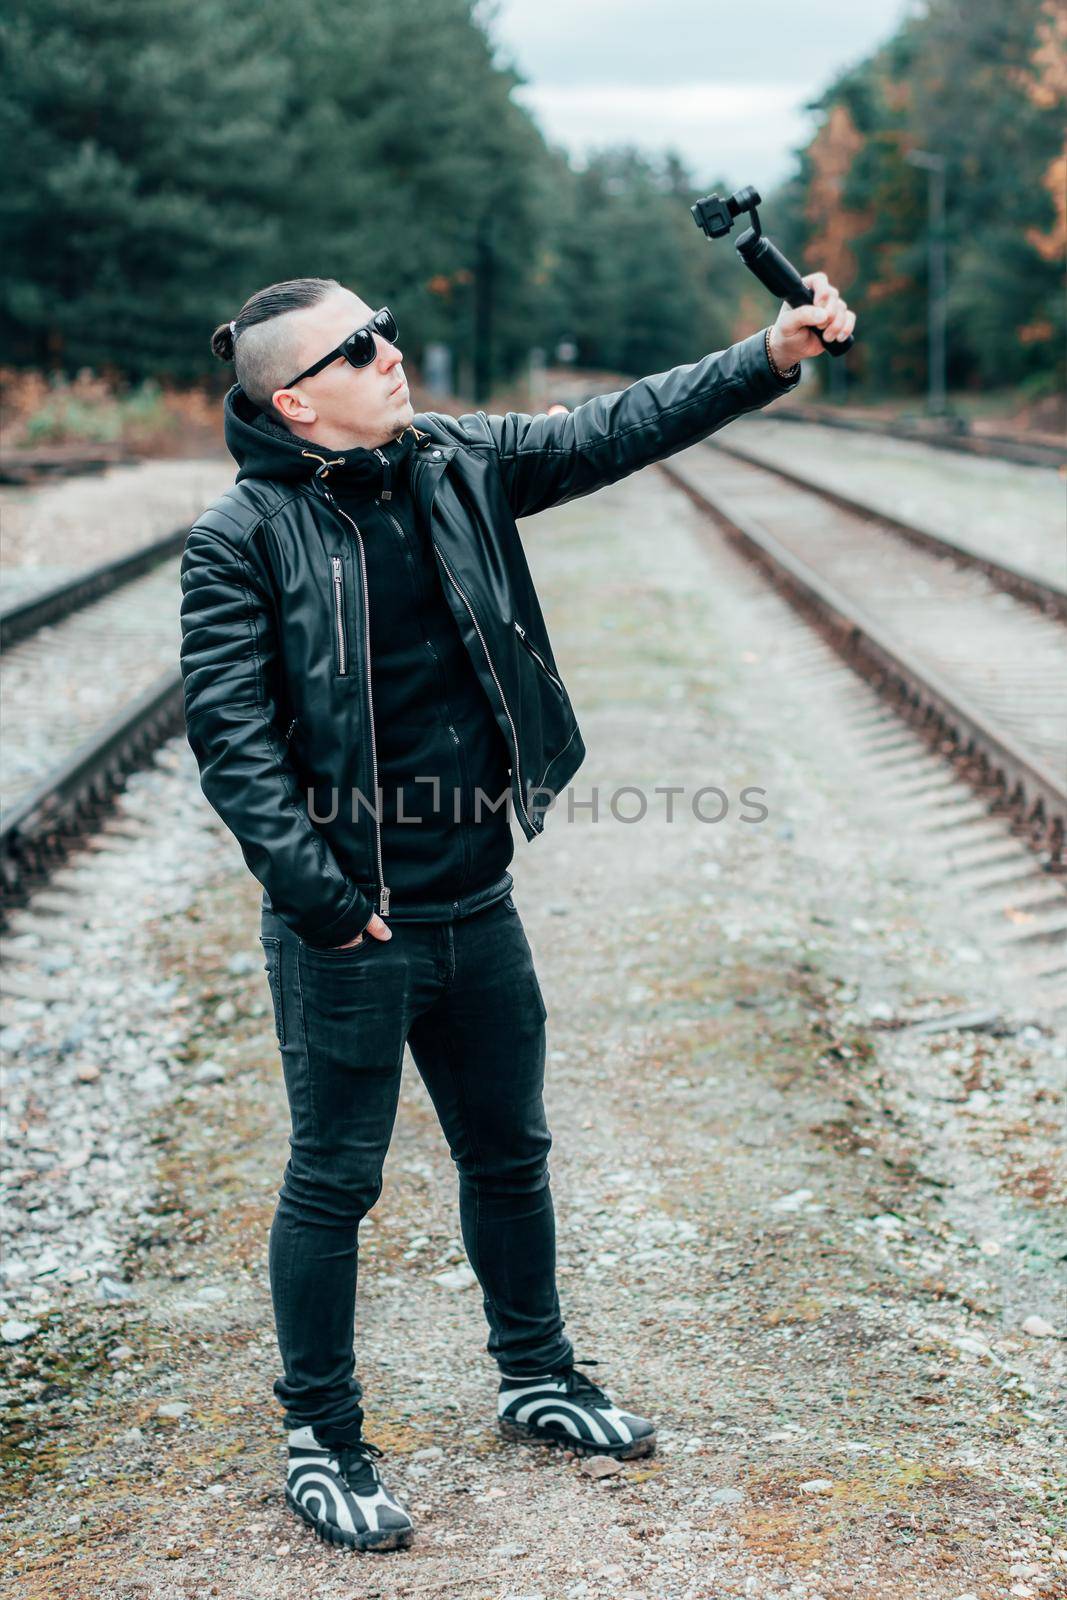 Blogger in Sunglasses Making Selfie or Streaming Video at the Pine Forest Using Action Camera with Gimbal Camera Stabilizer. Handsome Man in Black Clothes Making Photo